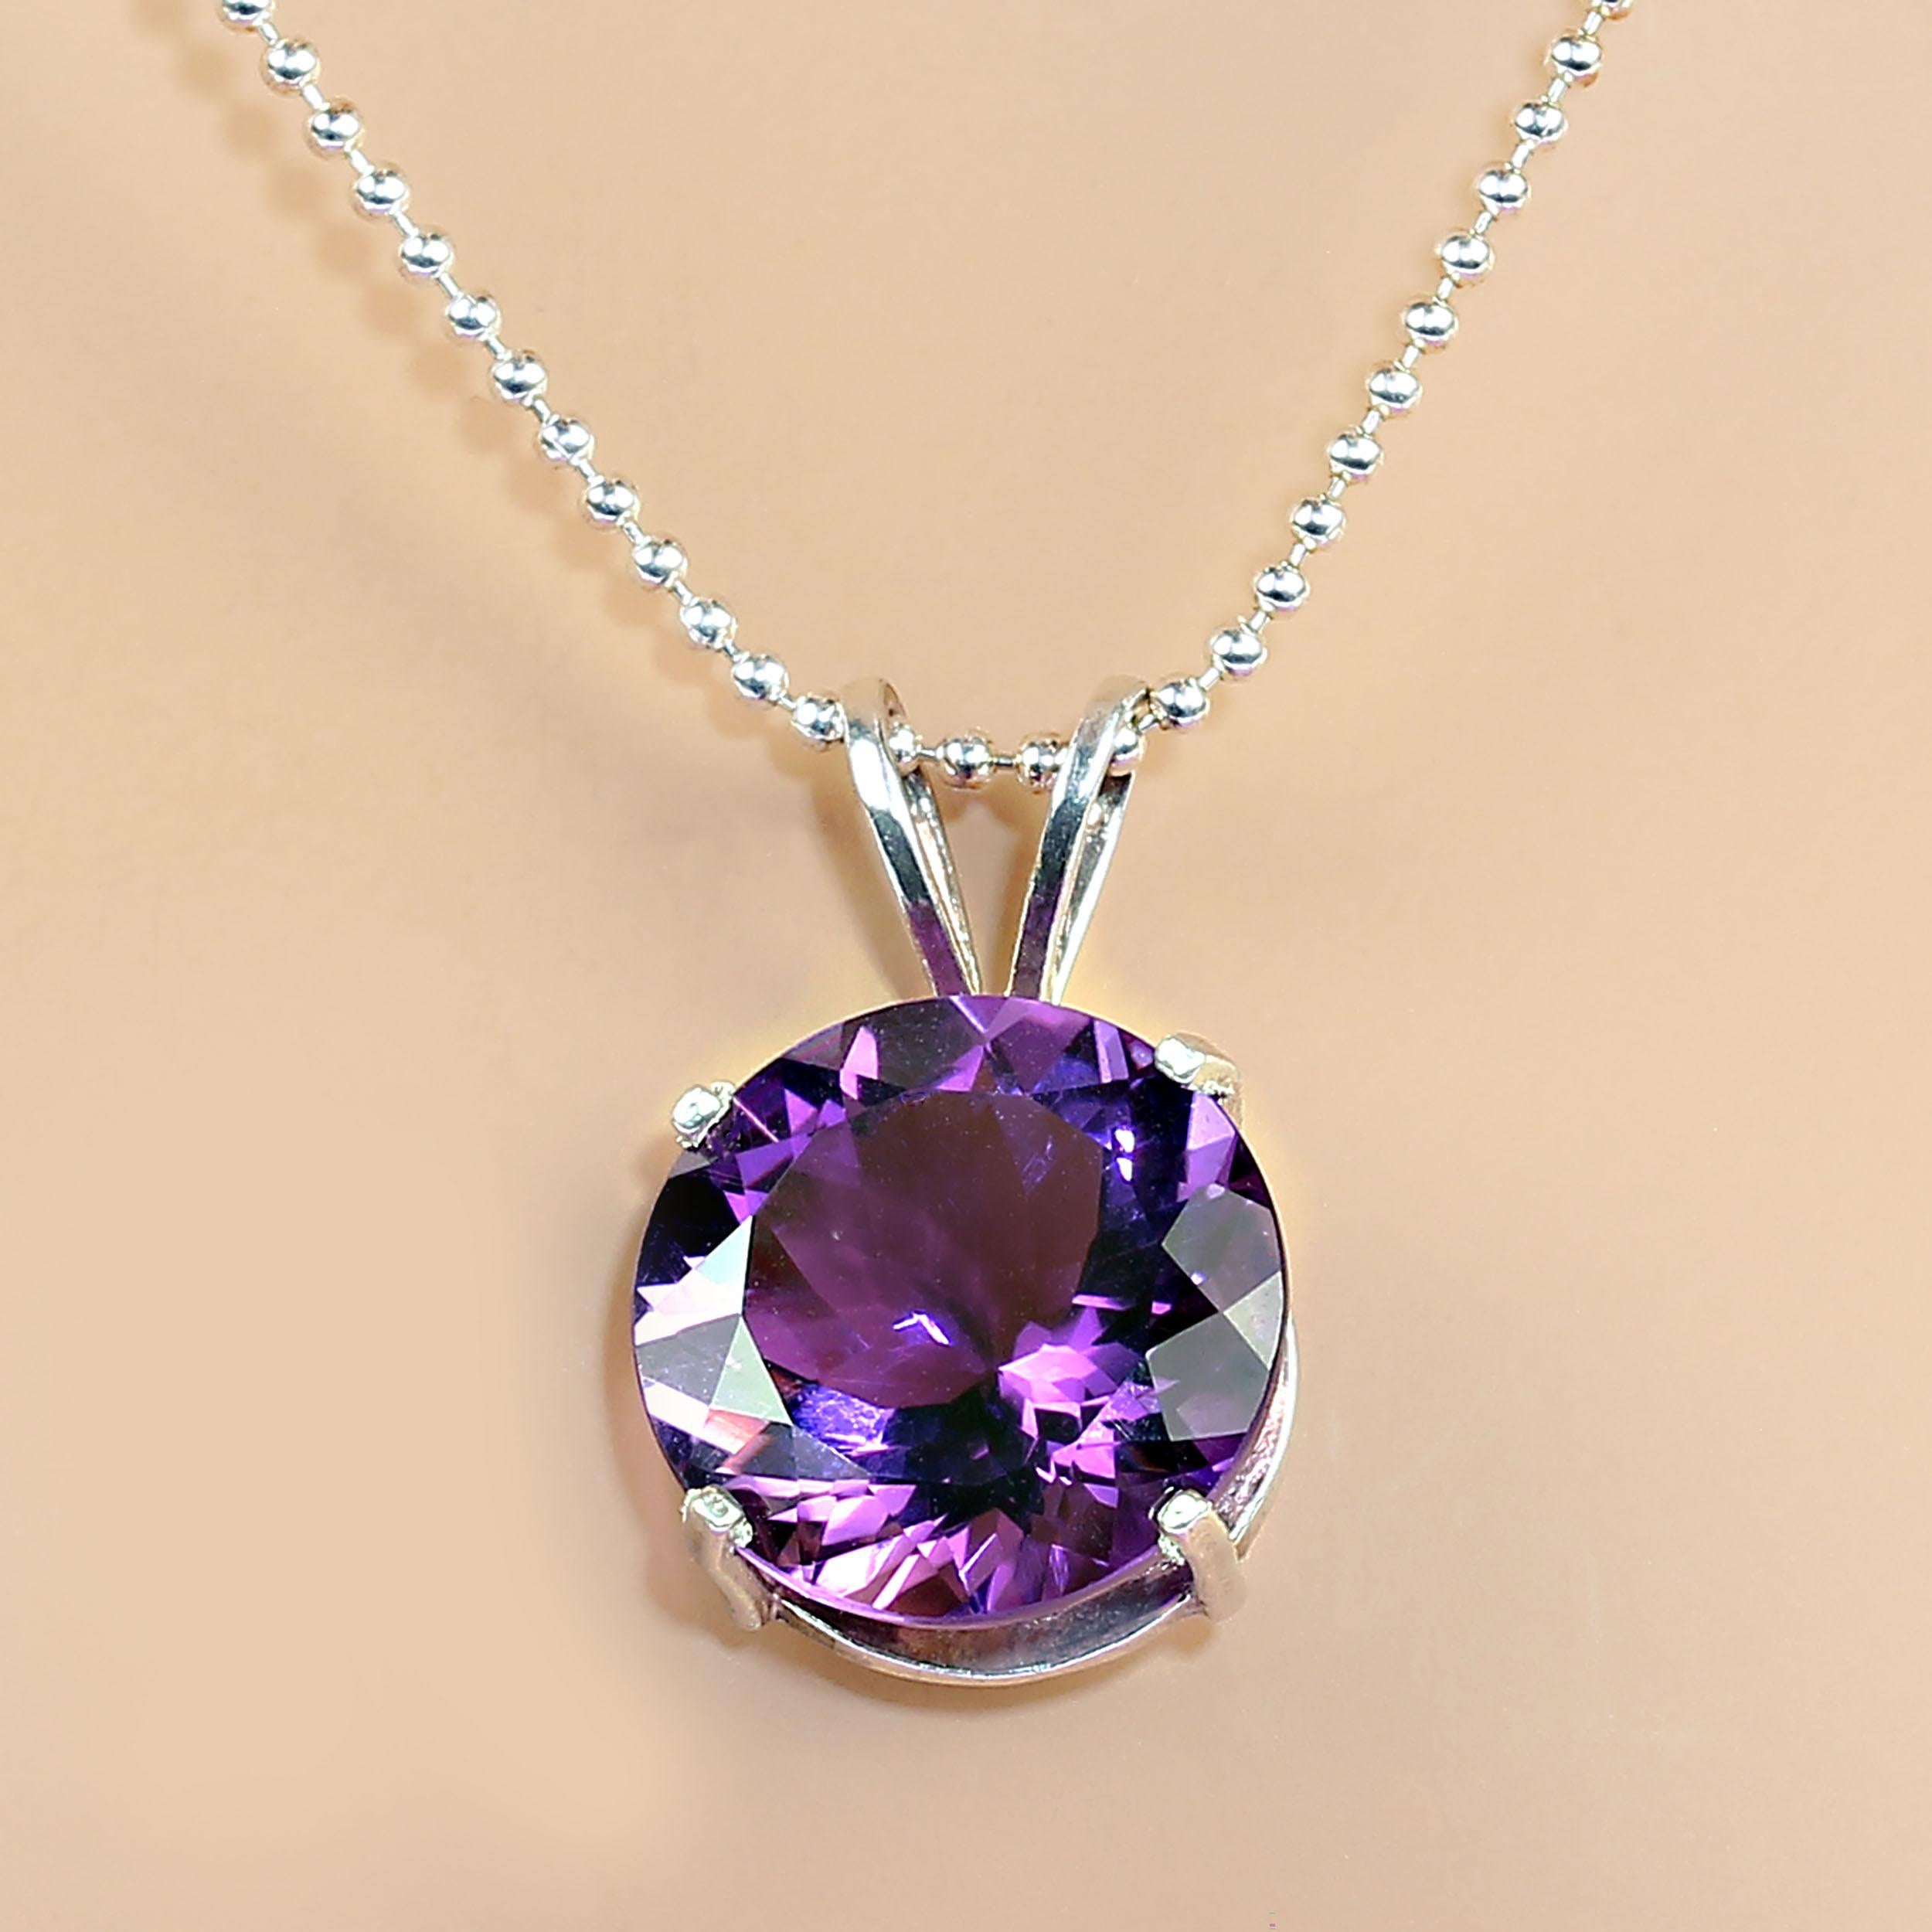 Awesome 13MM Round Amethyst in Sterling Silver Pendant.  This 6.81Ct sparkling Amethyst sits in a Sterling Silver setting.  MP2303